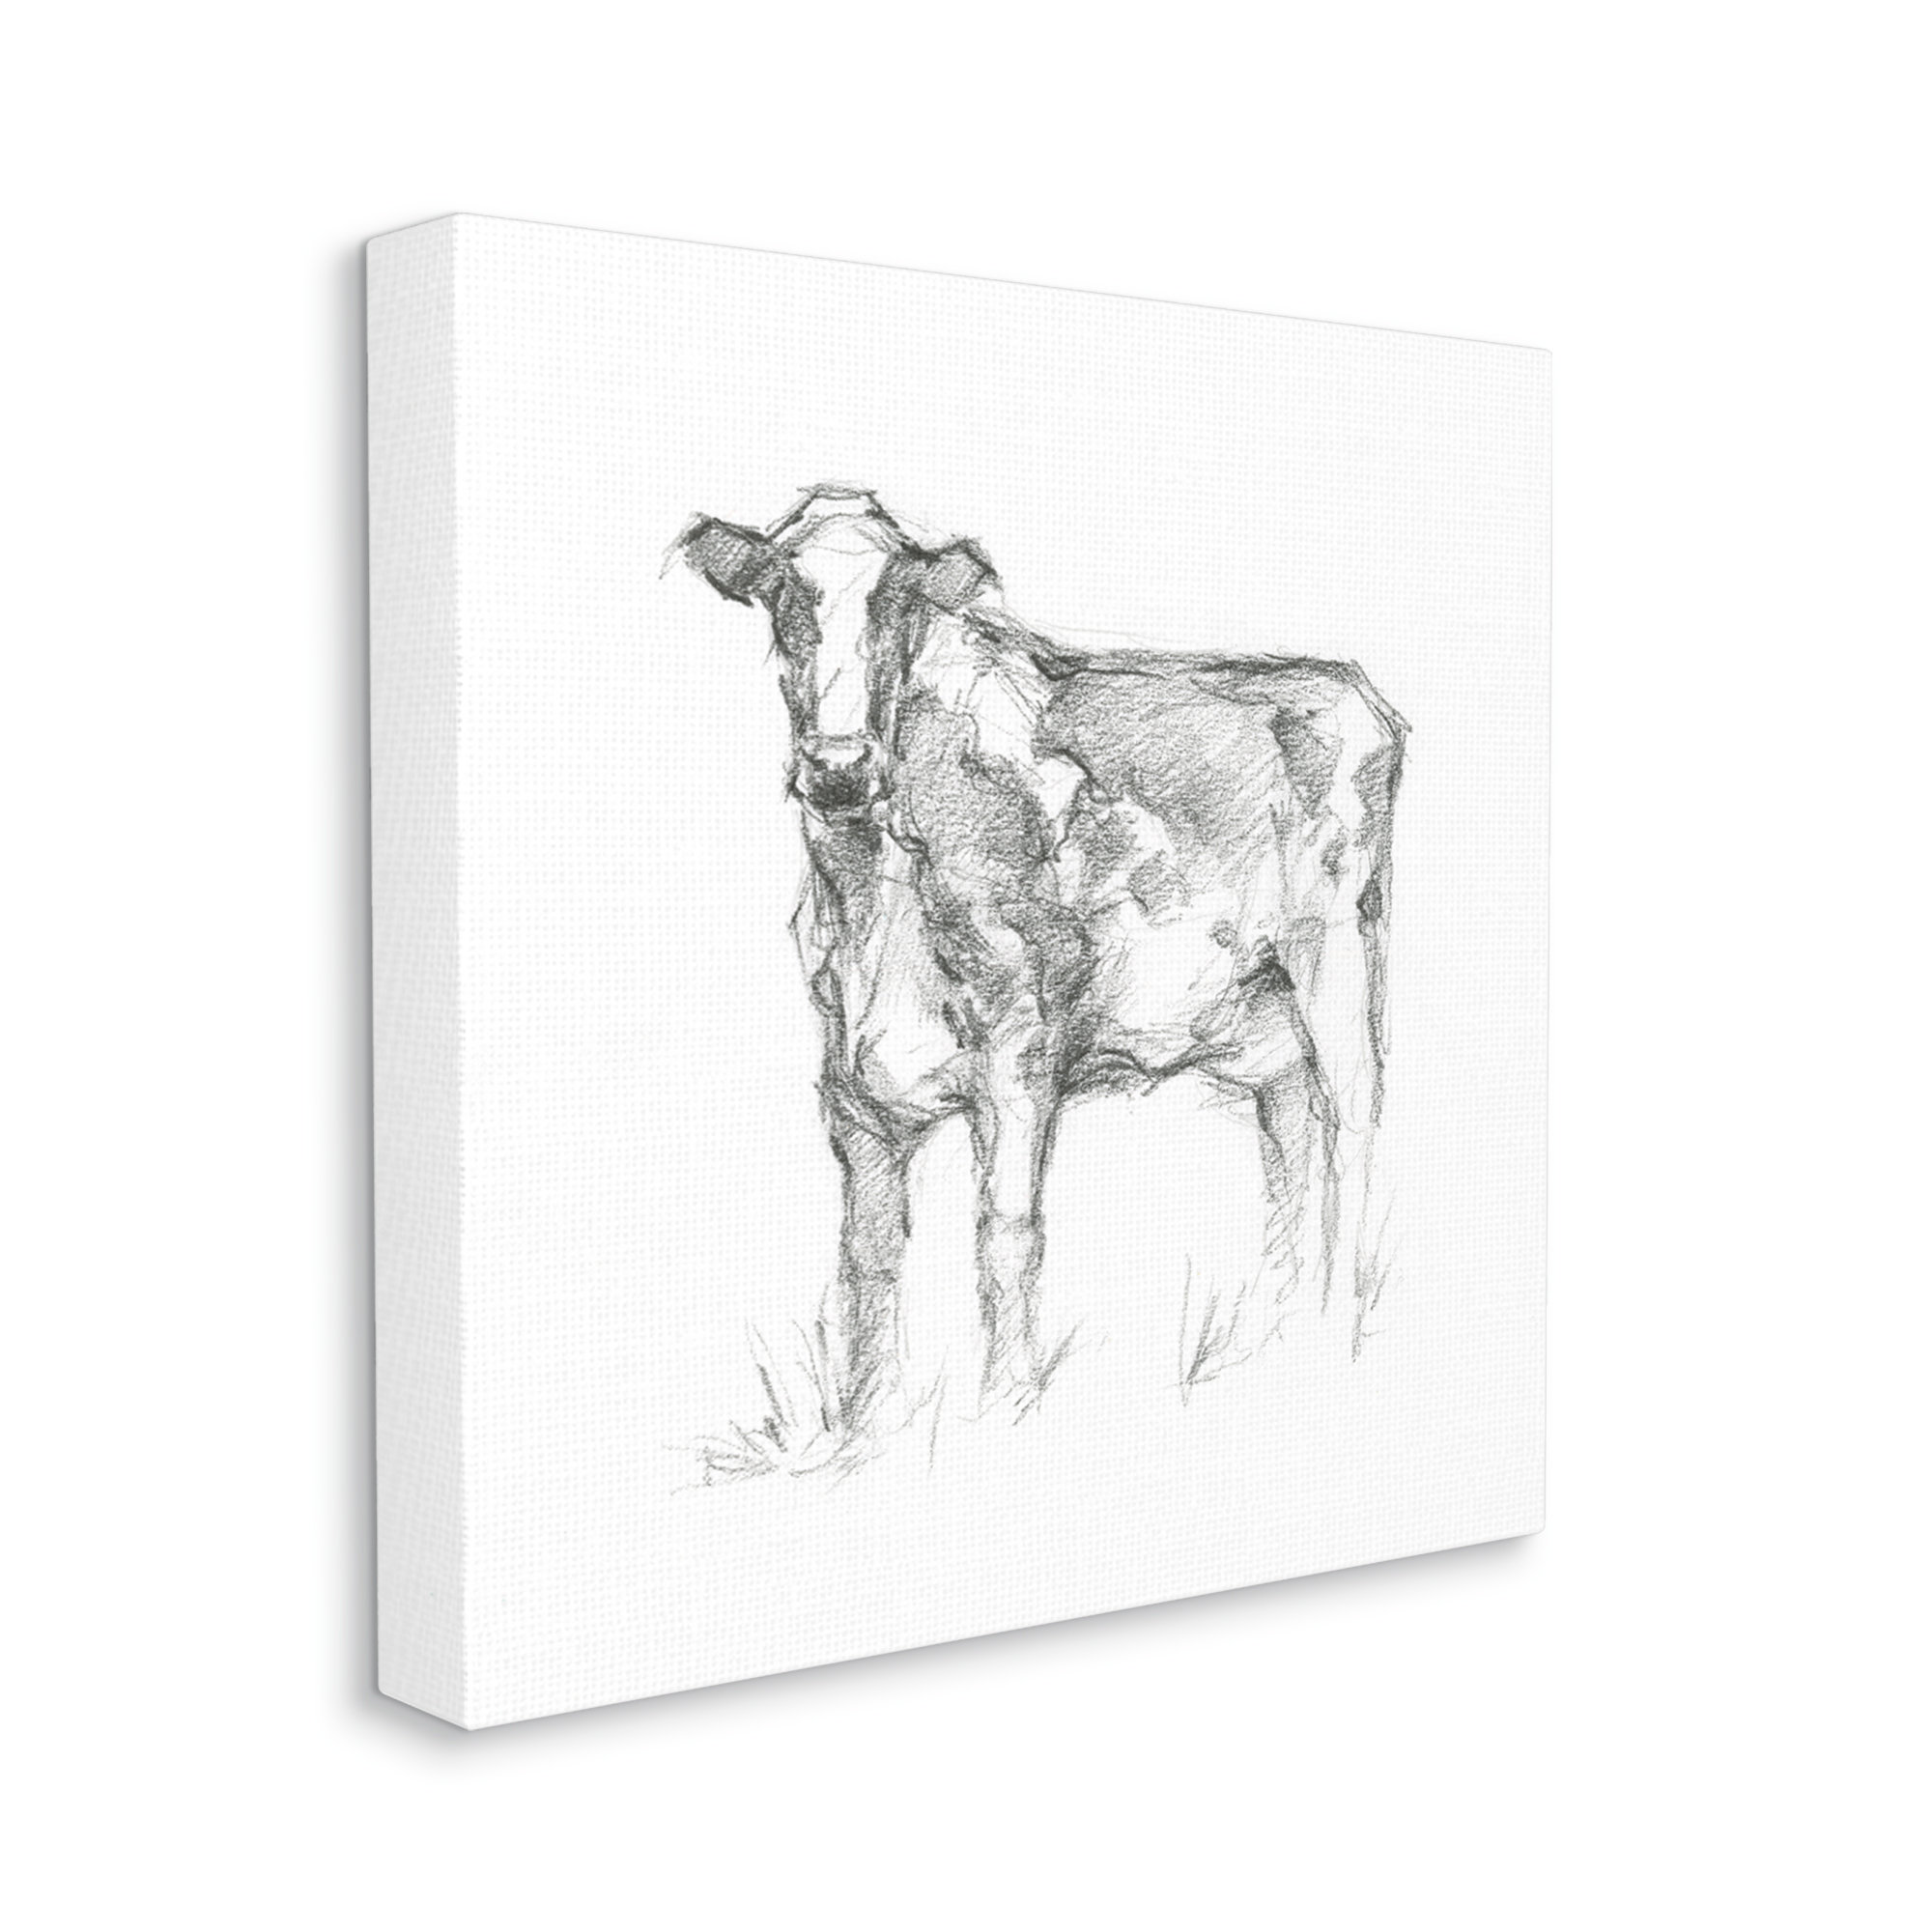 How to Draw a Cow | Cute drawings, Animal drawings, Drawings